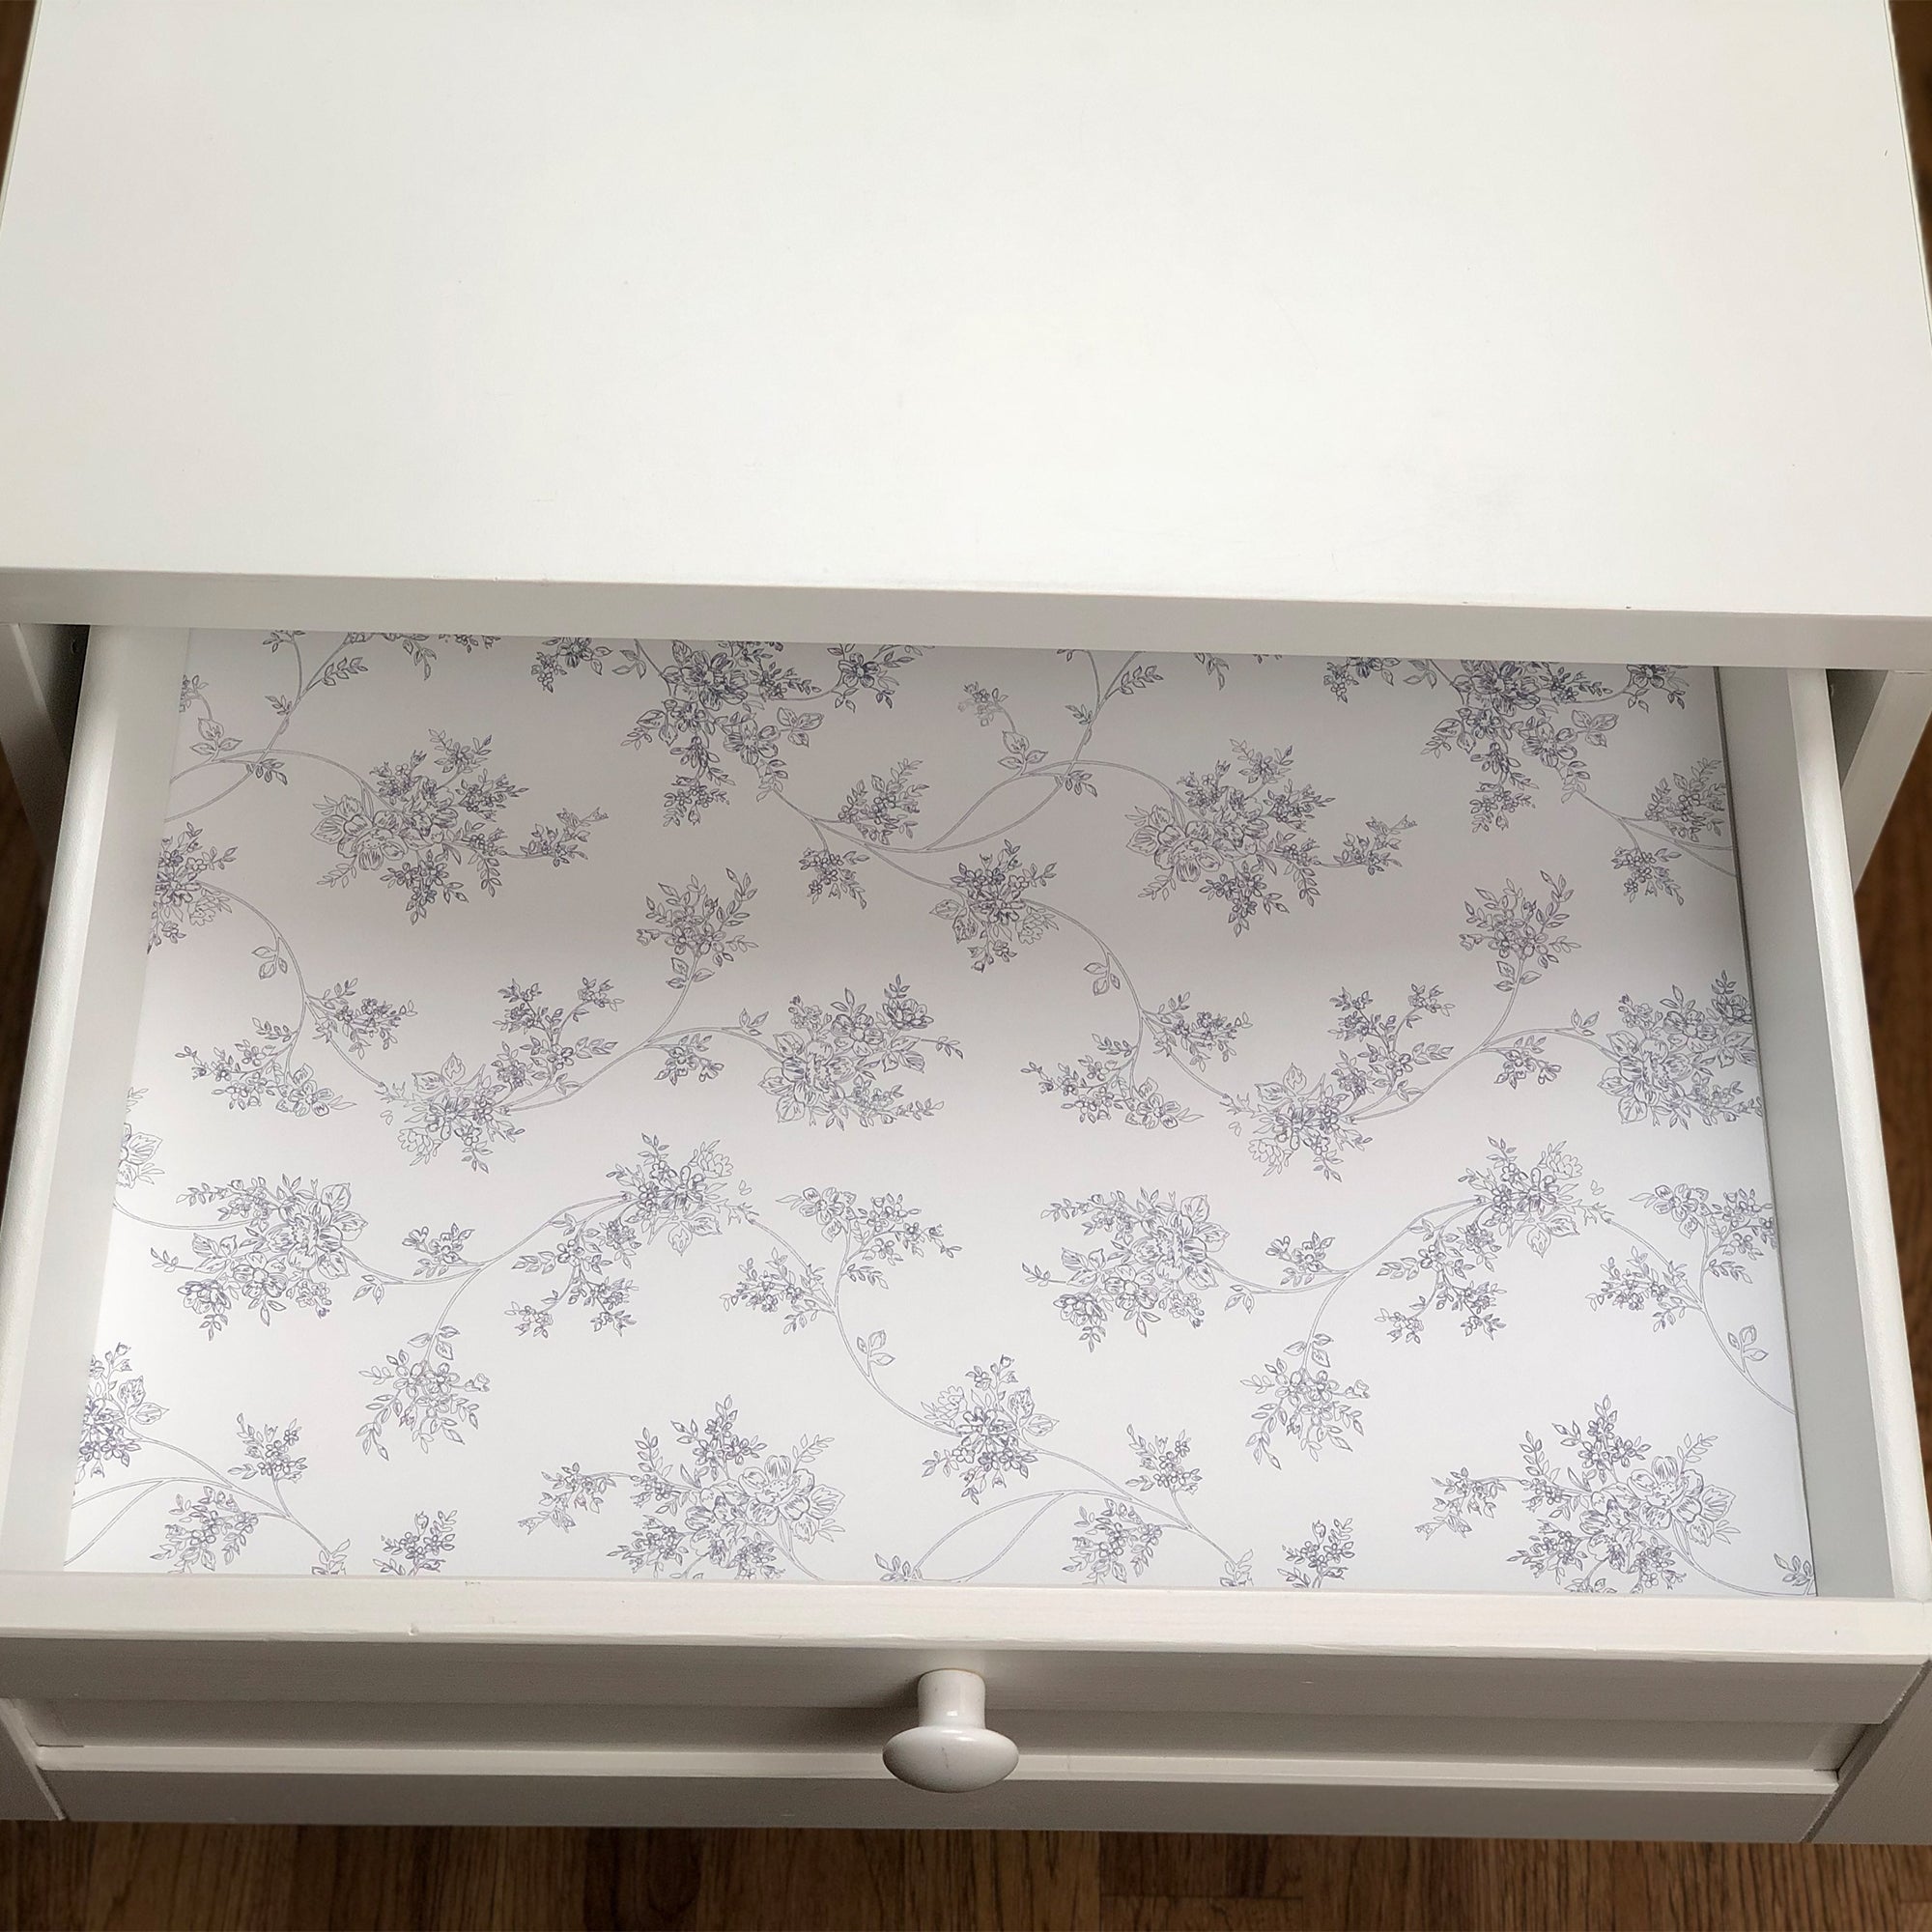 9 Best Scented Drawer Liners For Dresser for 2023